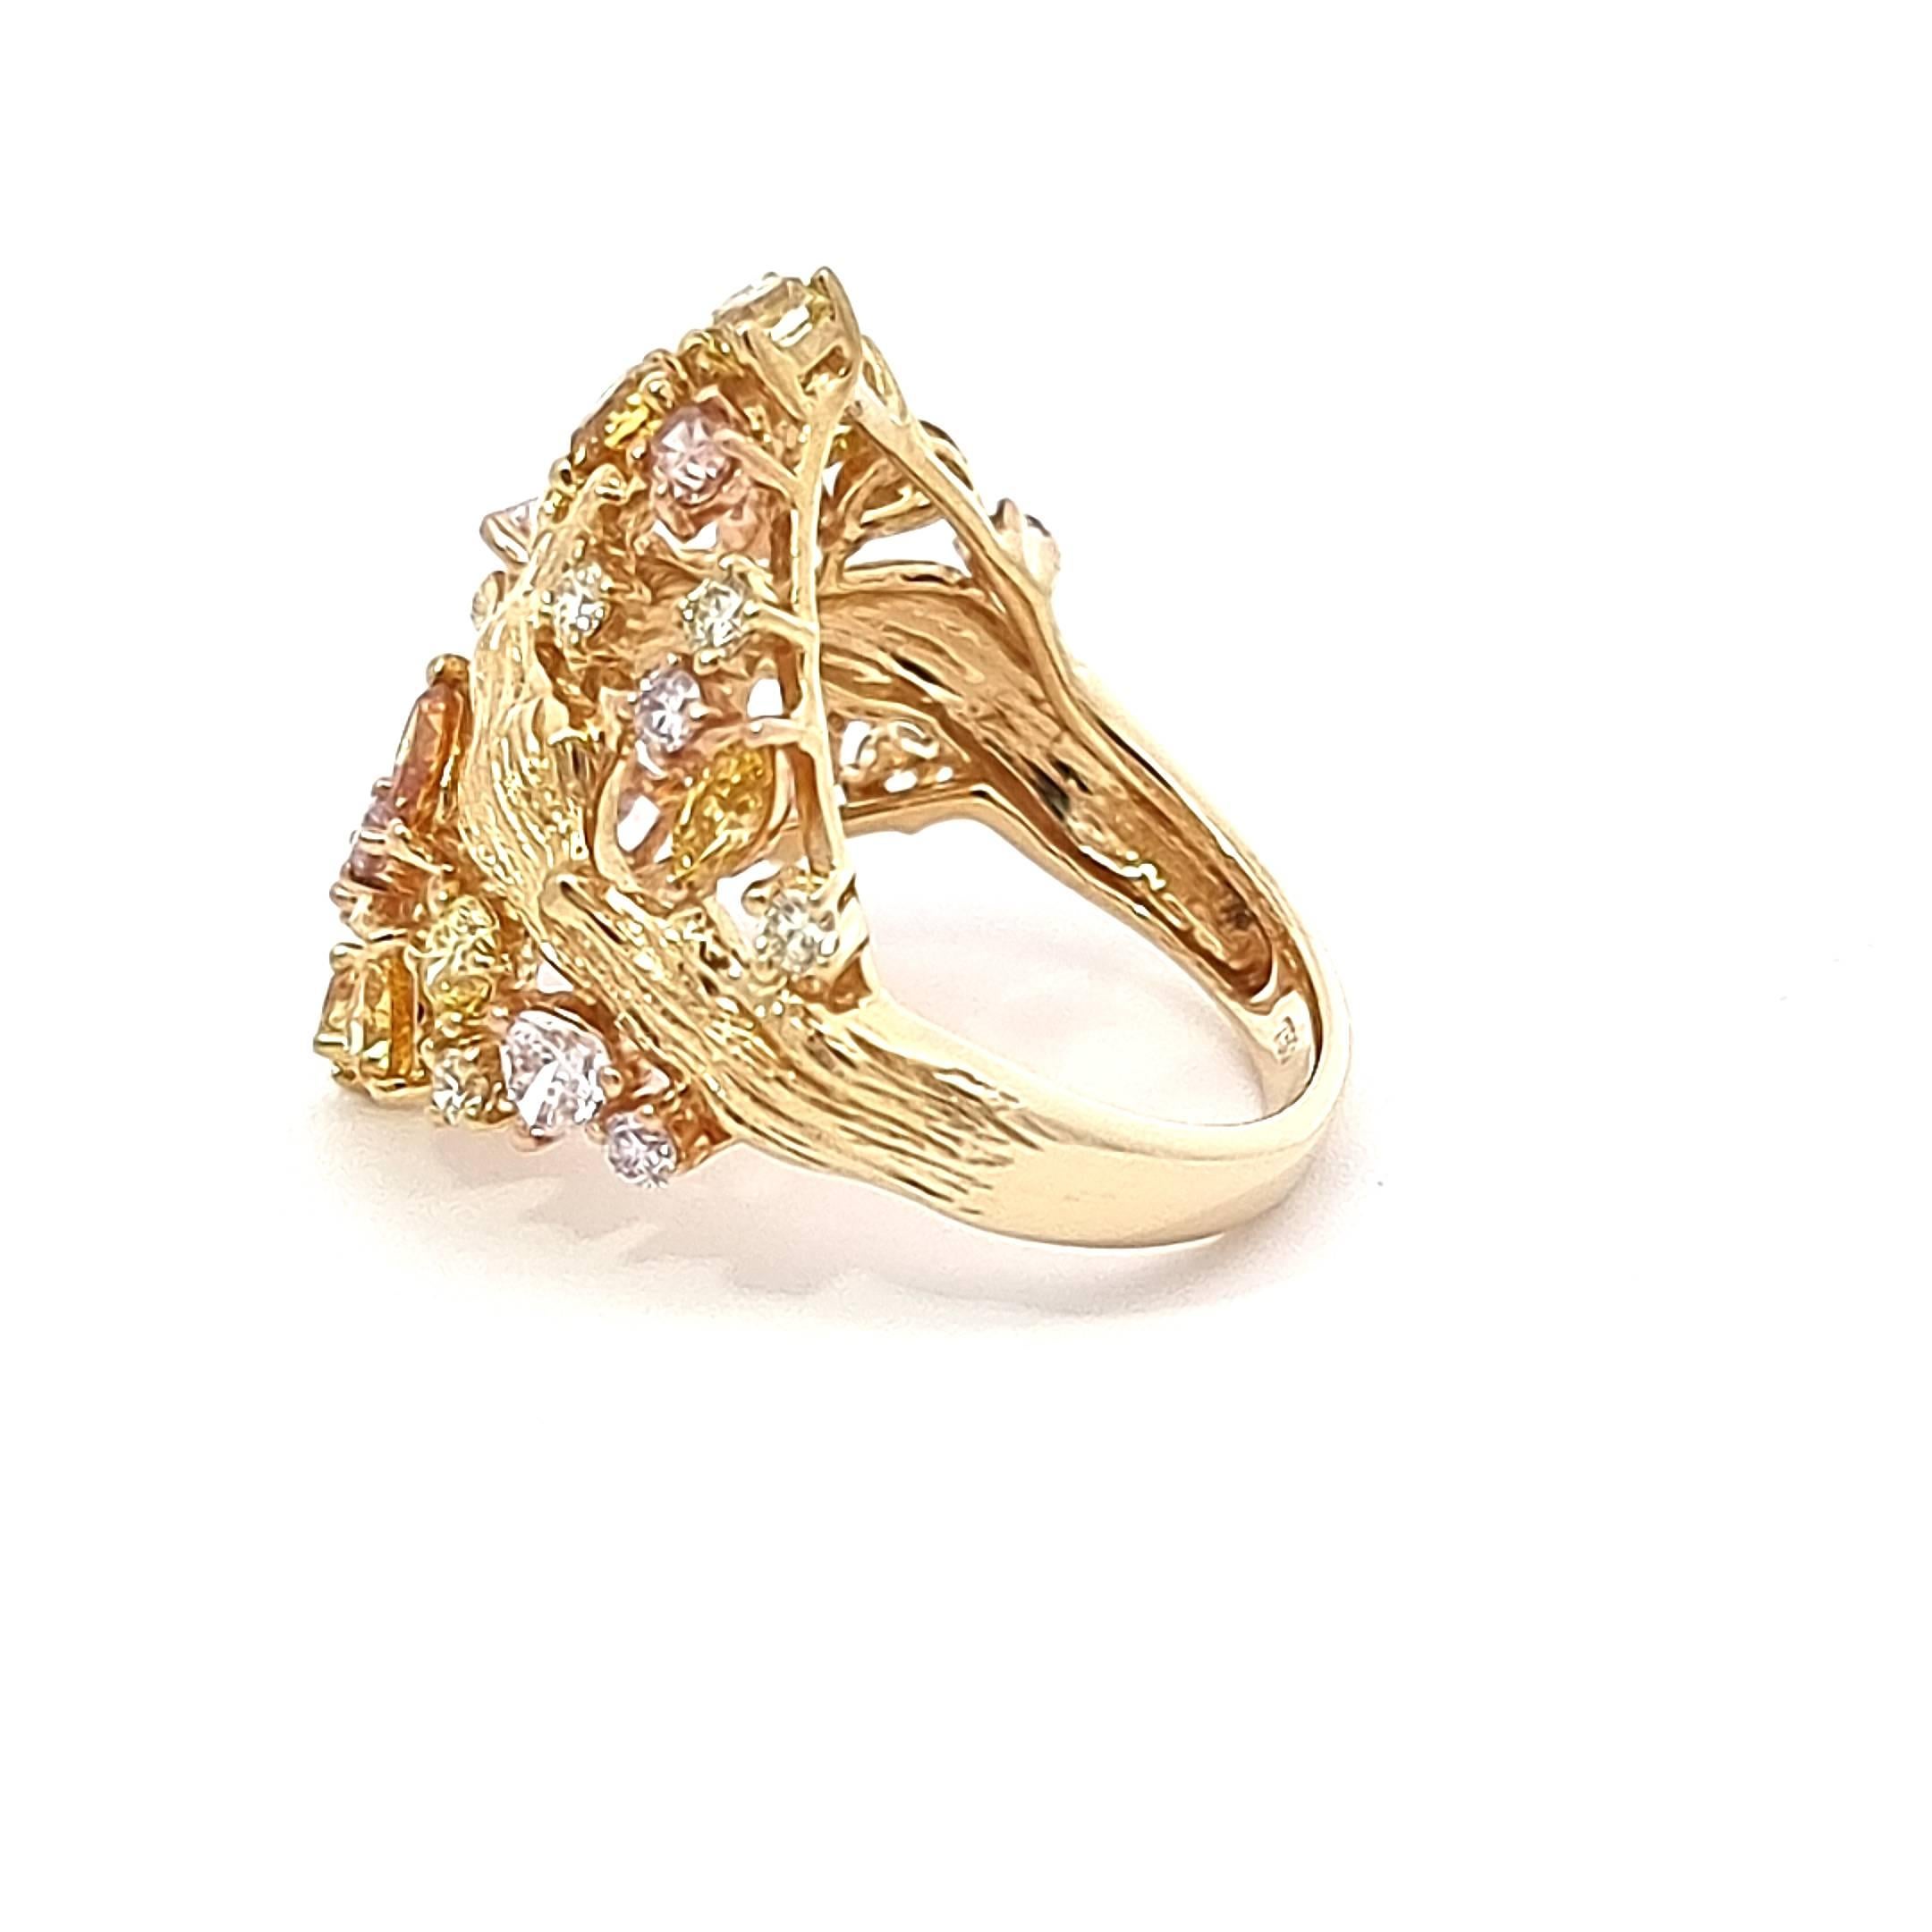 Behold a masterpiece of artistry and nature's inspiration, the 18K gold cocktail ring that defies convention. This unique creation is a harmonious blend of sophistication and the organic world, a testament to the beauty of the natural